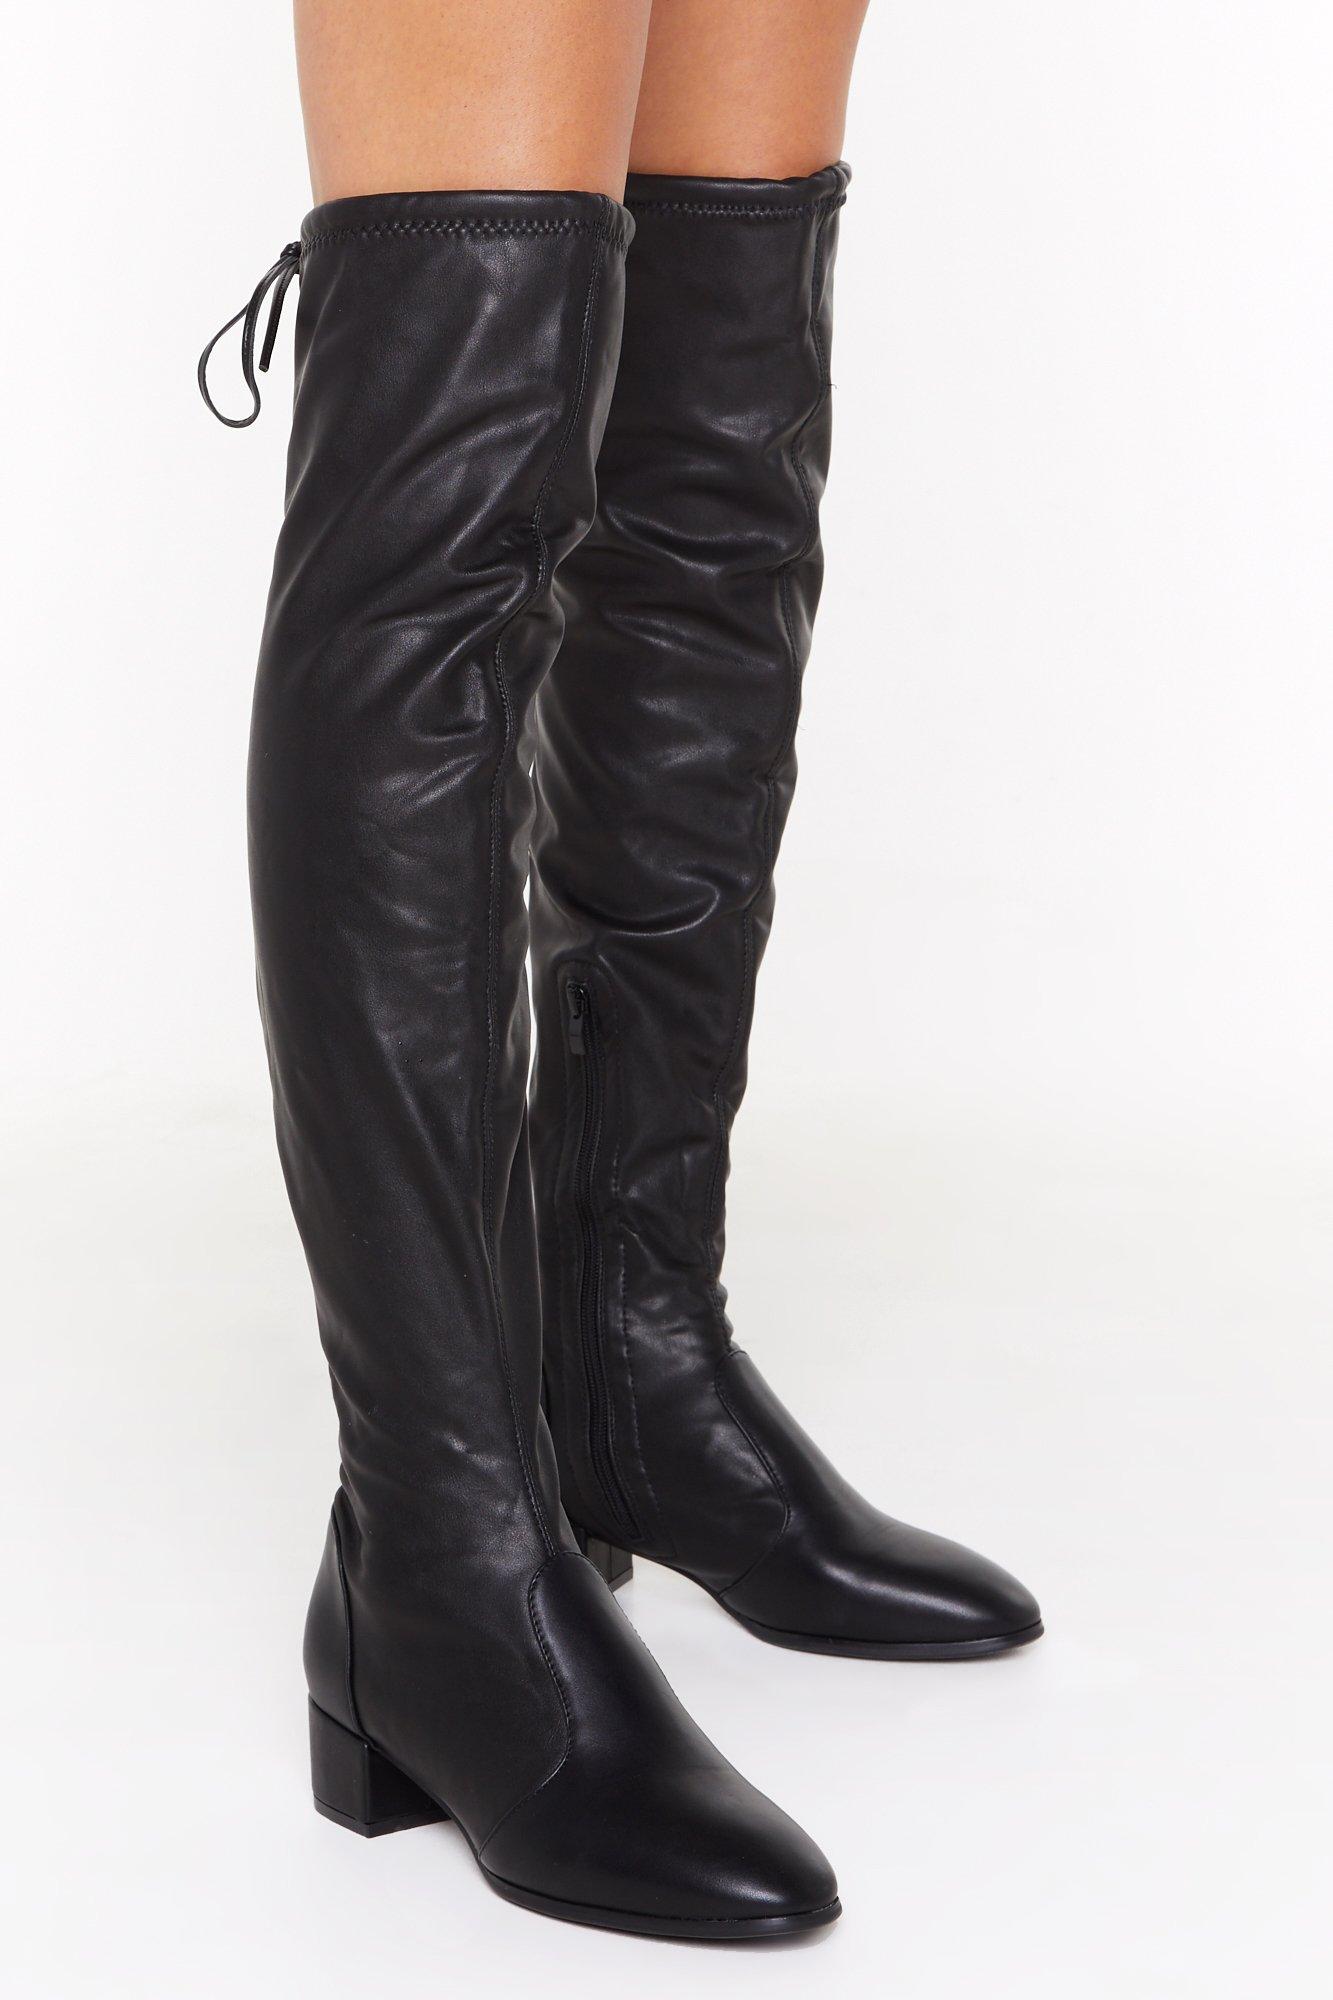 pleather thigh high boots